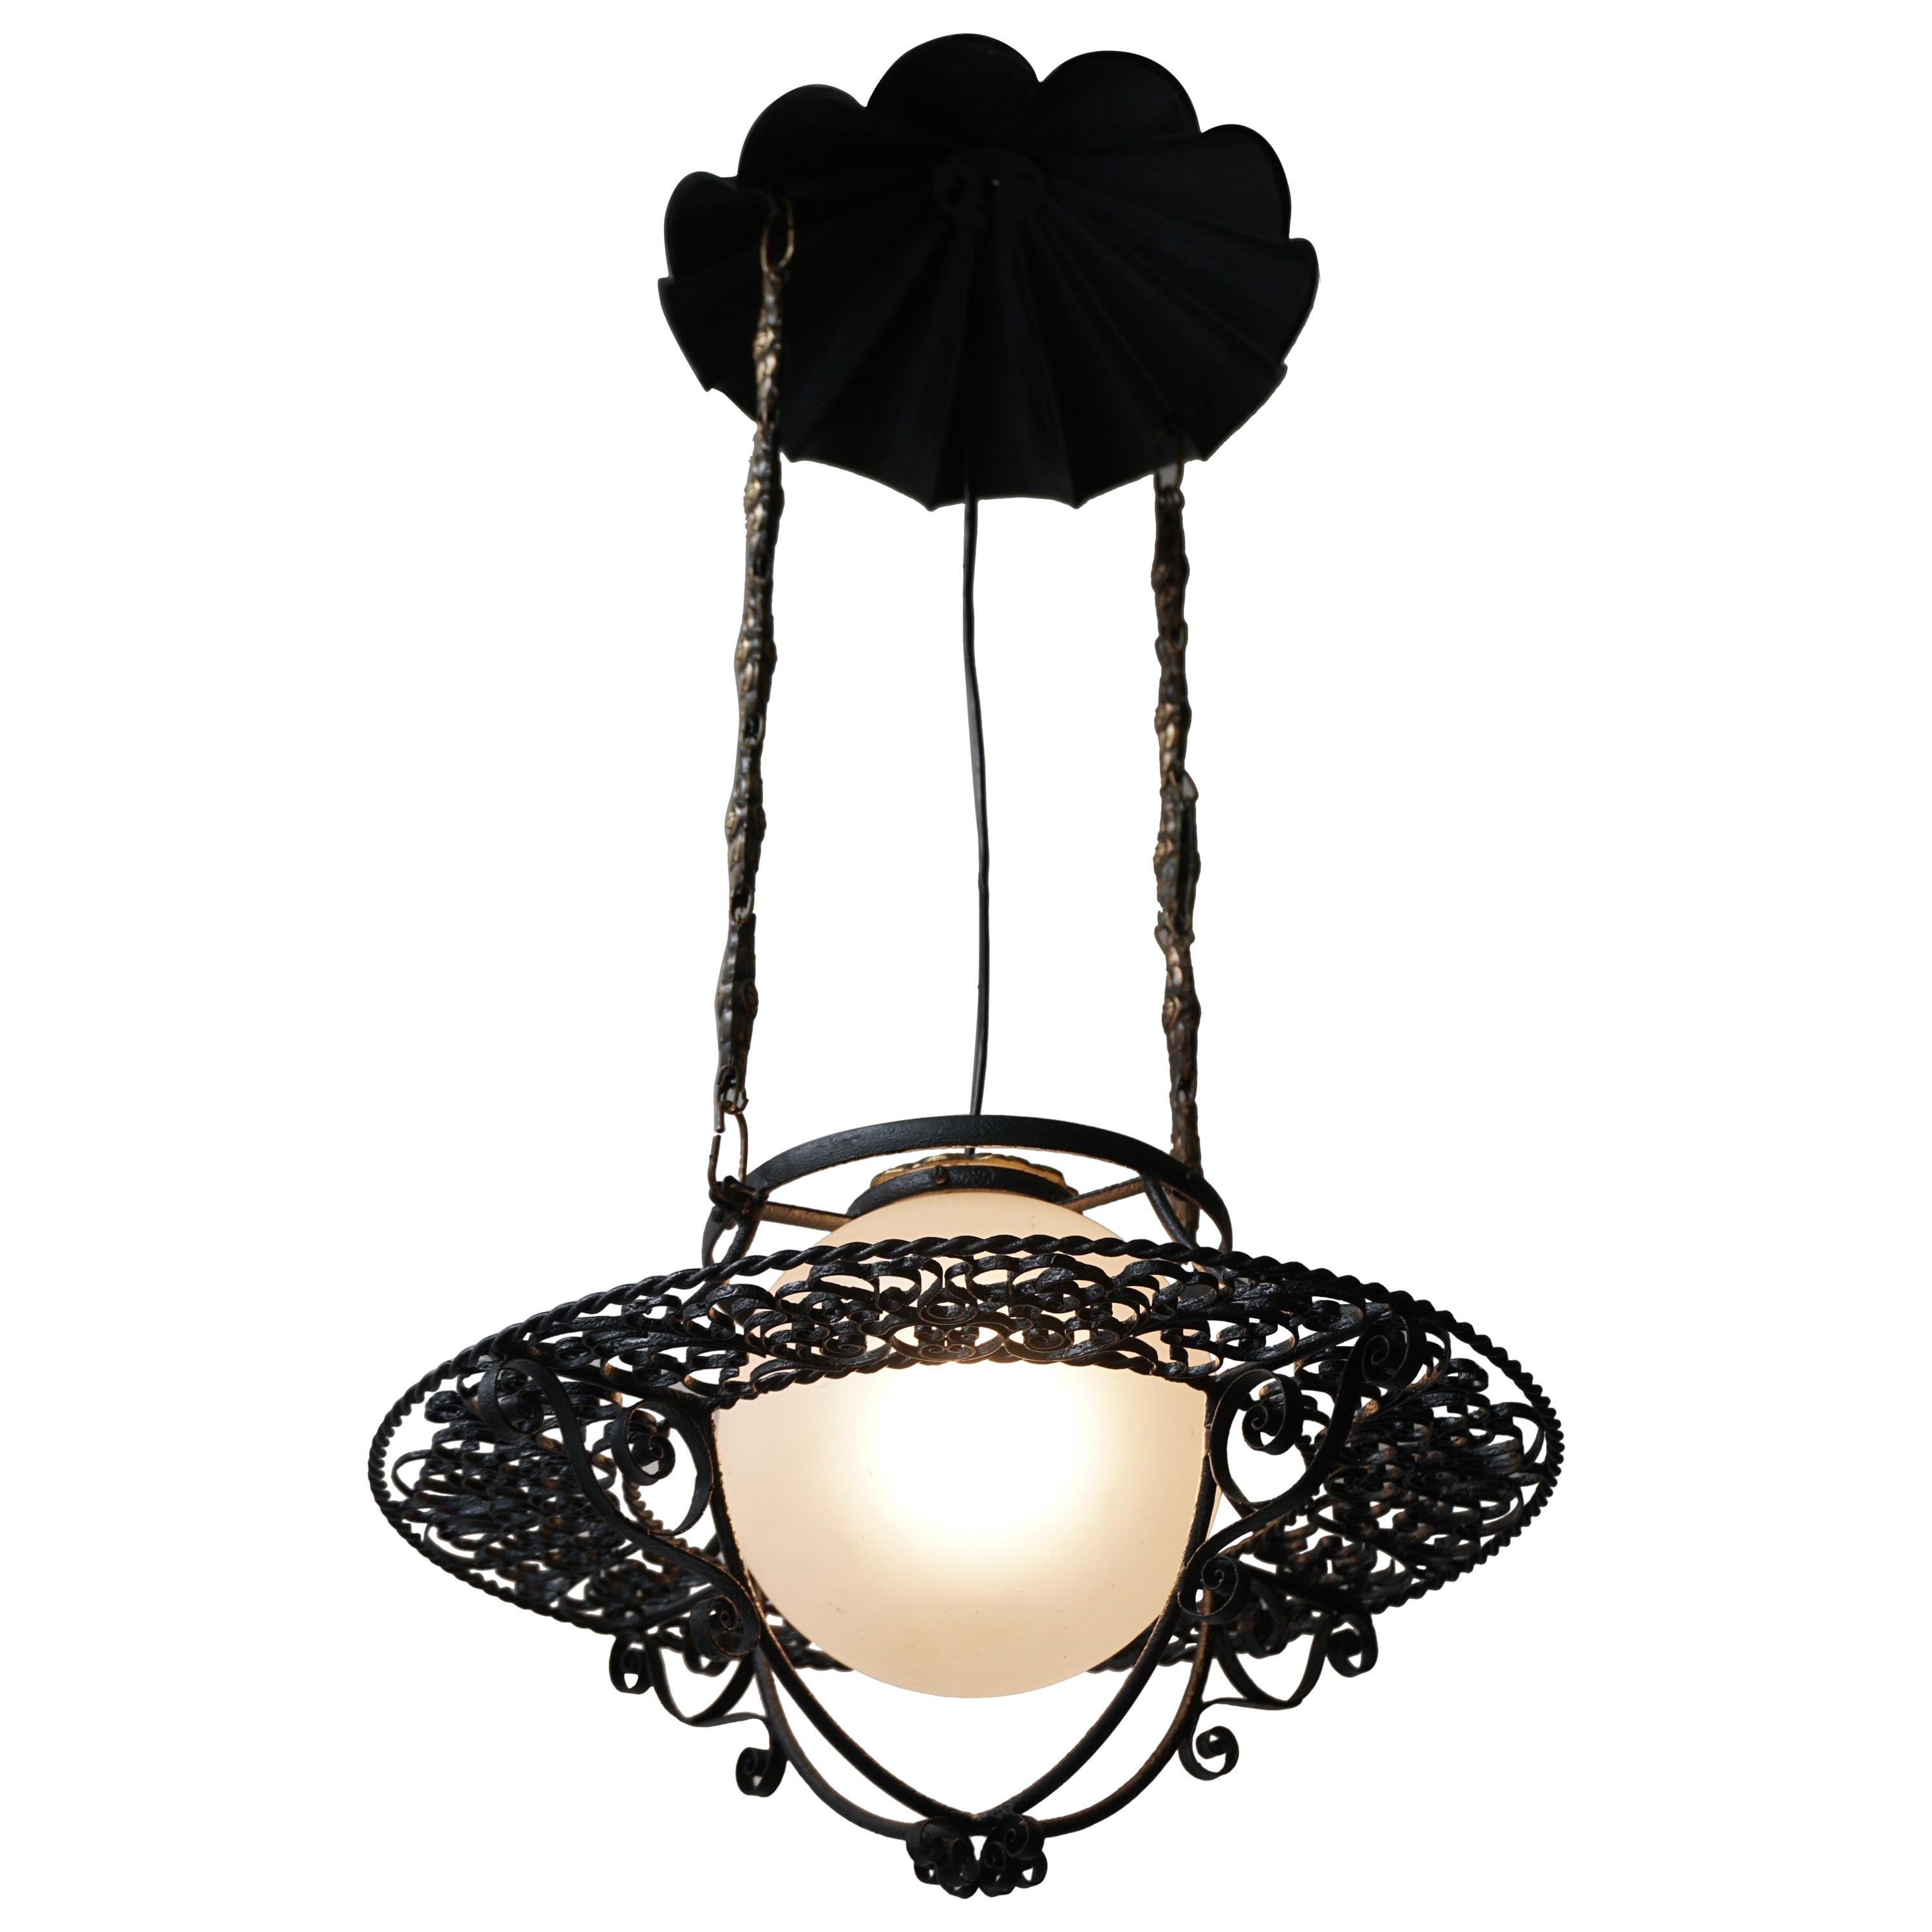 Italian Round Painted Iron Ceiling Light with One Centre Light For Sale